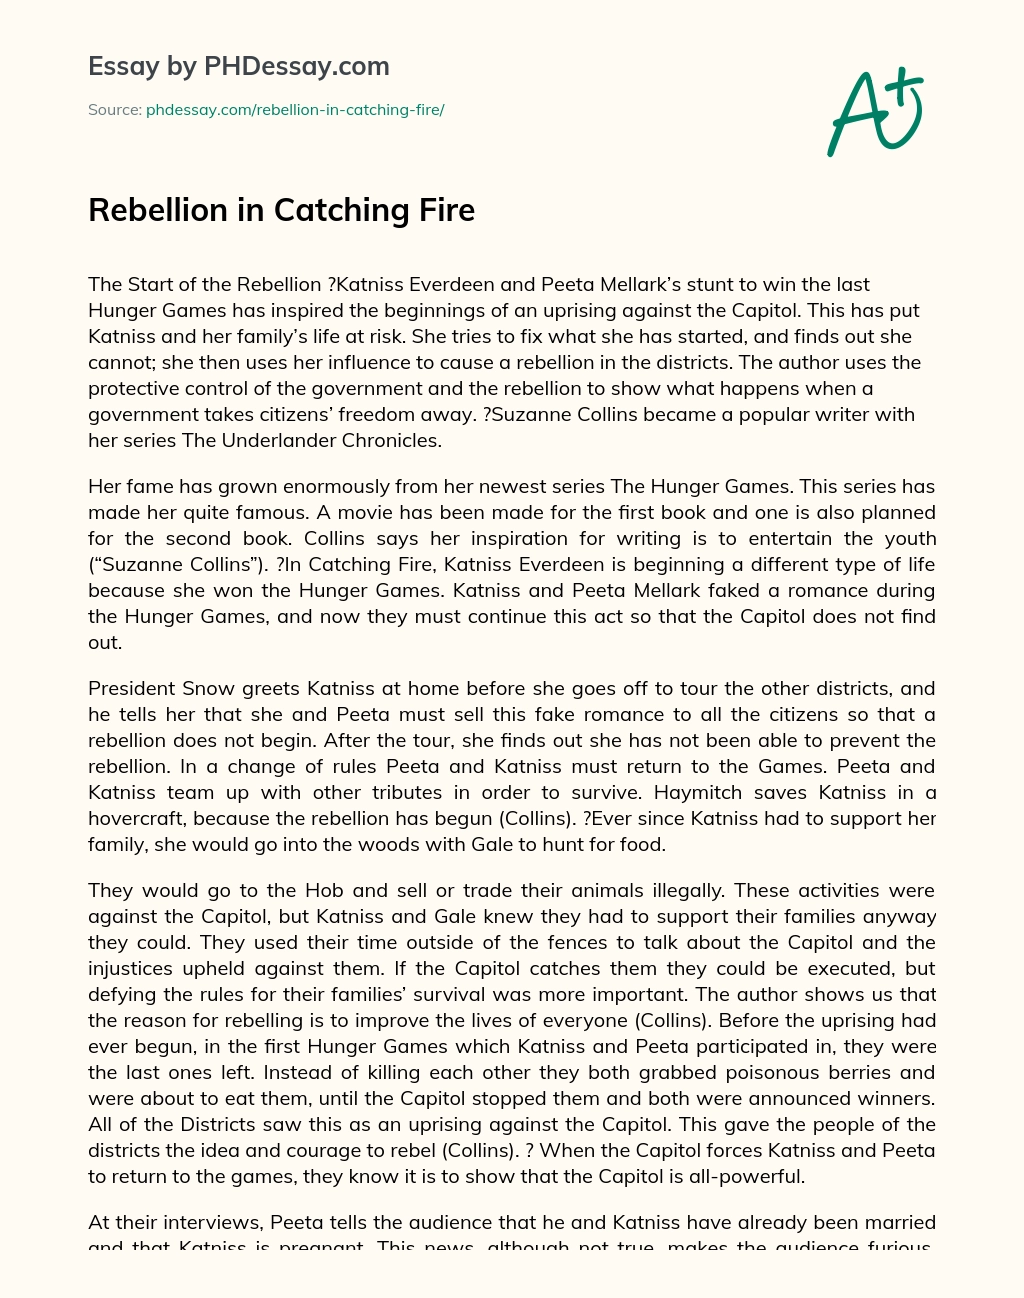 Rebellion in Catching Fire essay